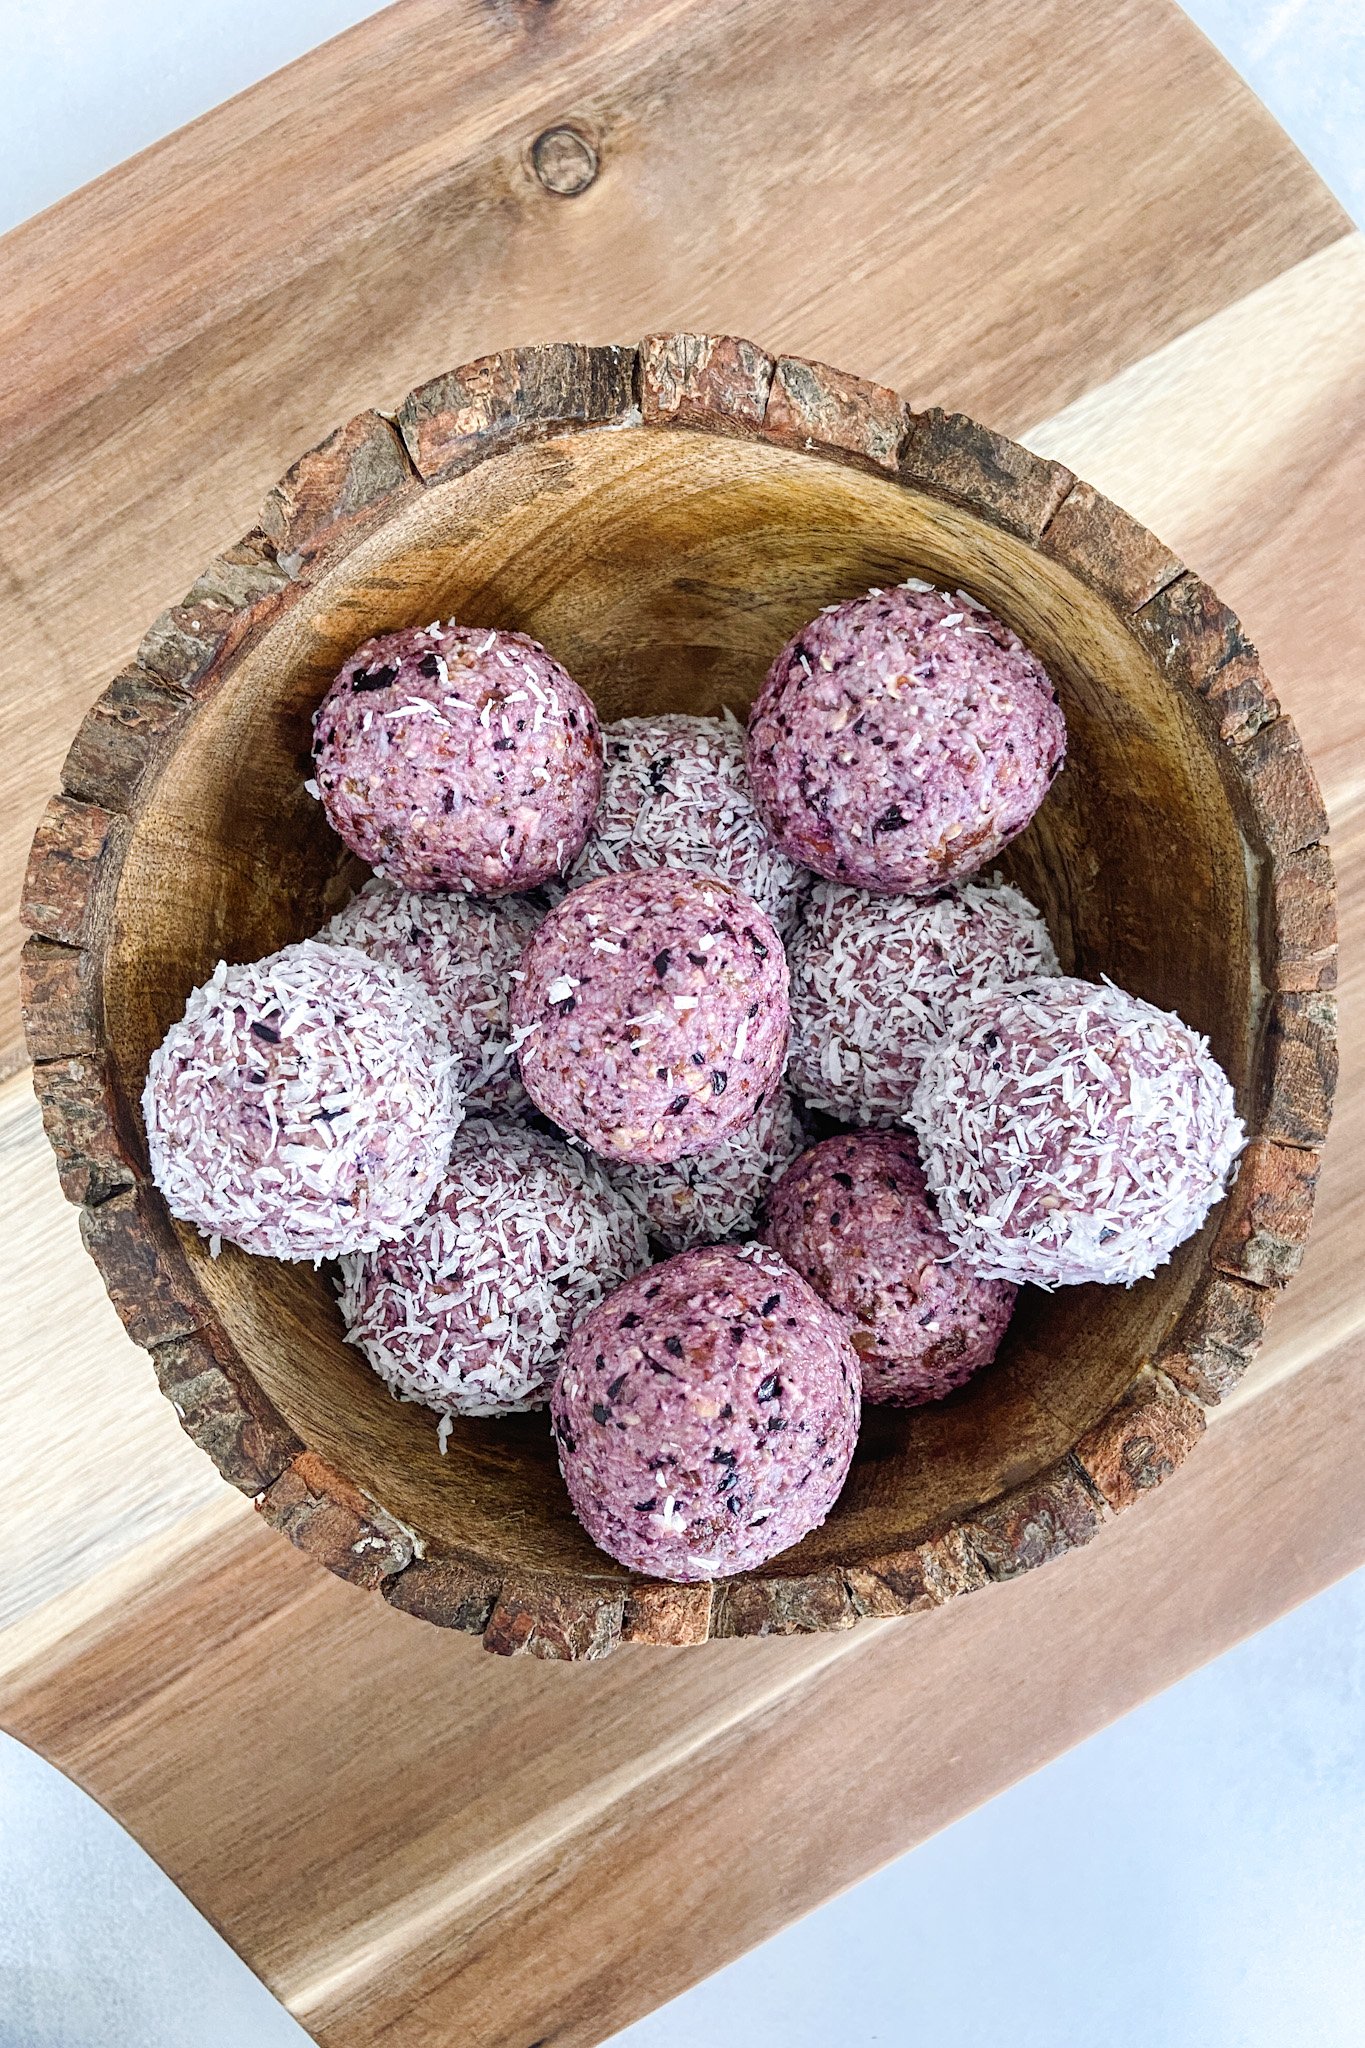 Blueberry bliss balls served in a wooden bowl